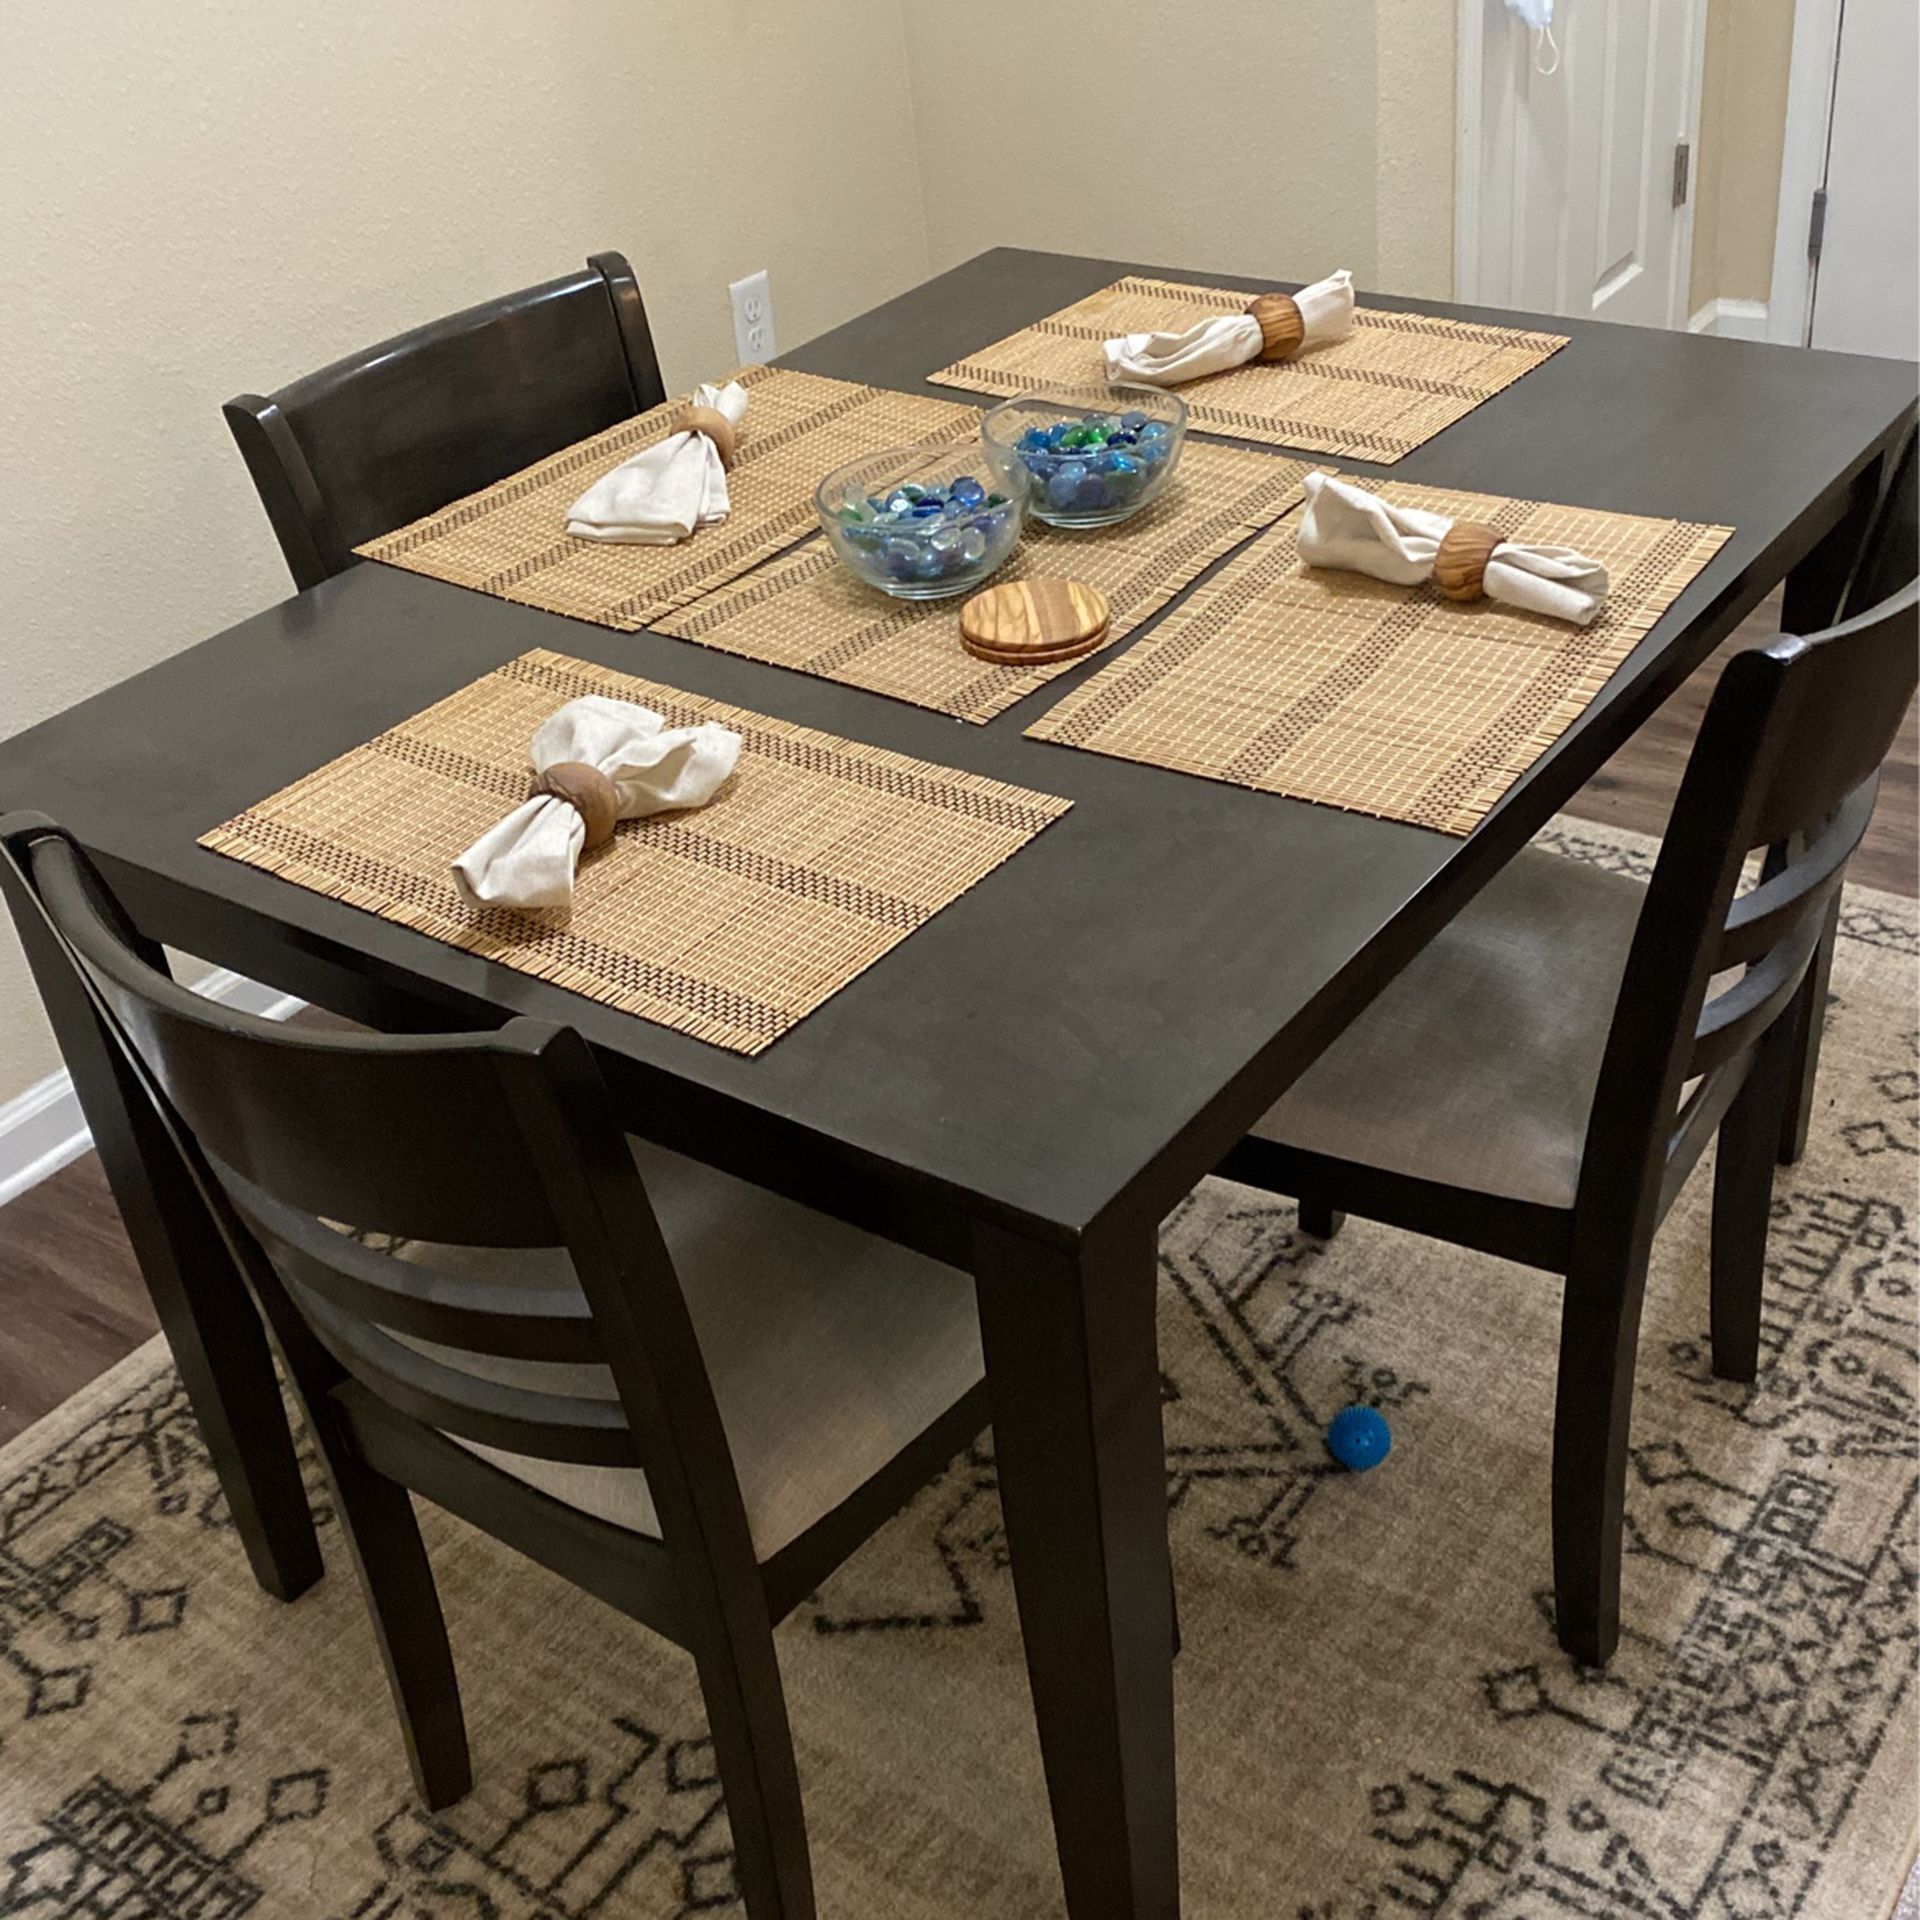 Small, Five Piece Dining Room Set Four Chairs One Table Great Condition Only Used Twice $275